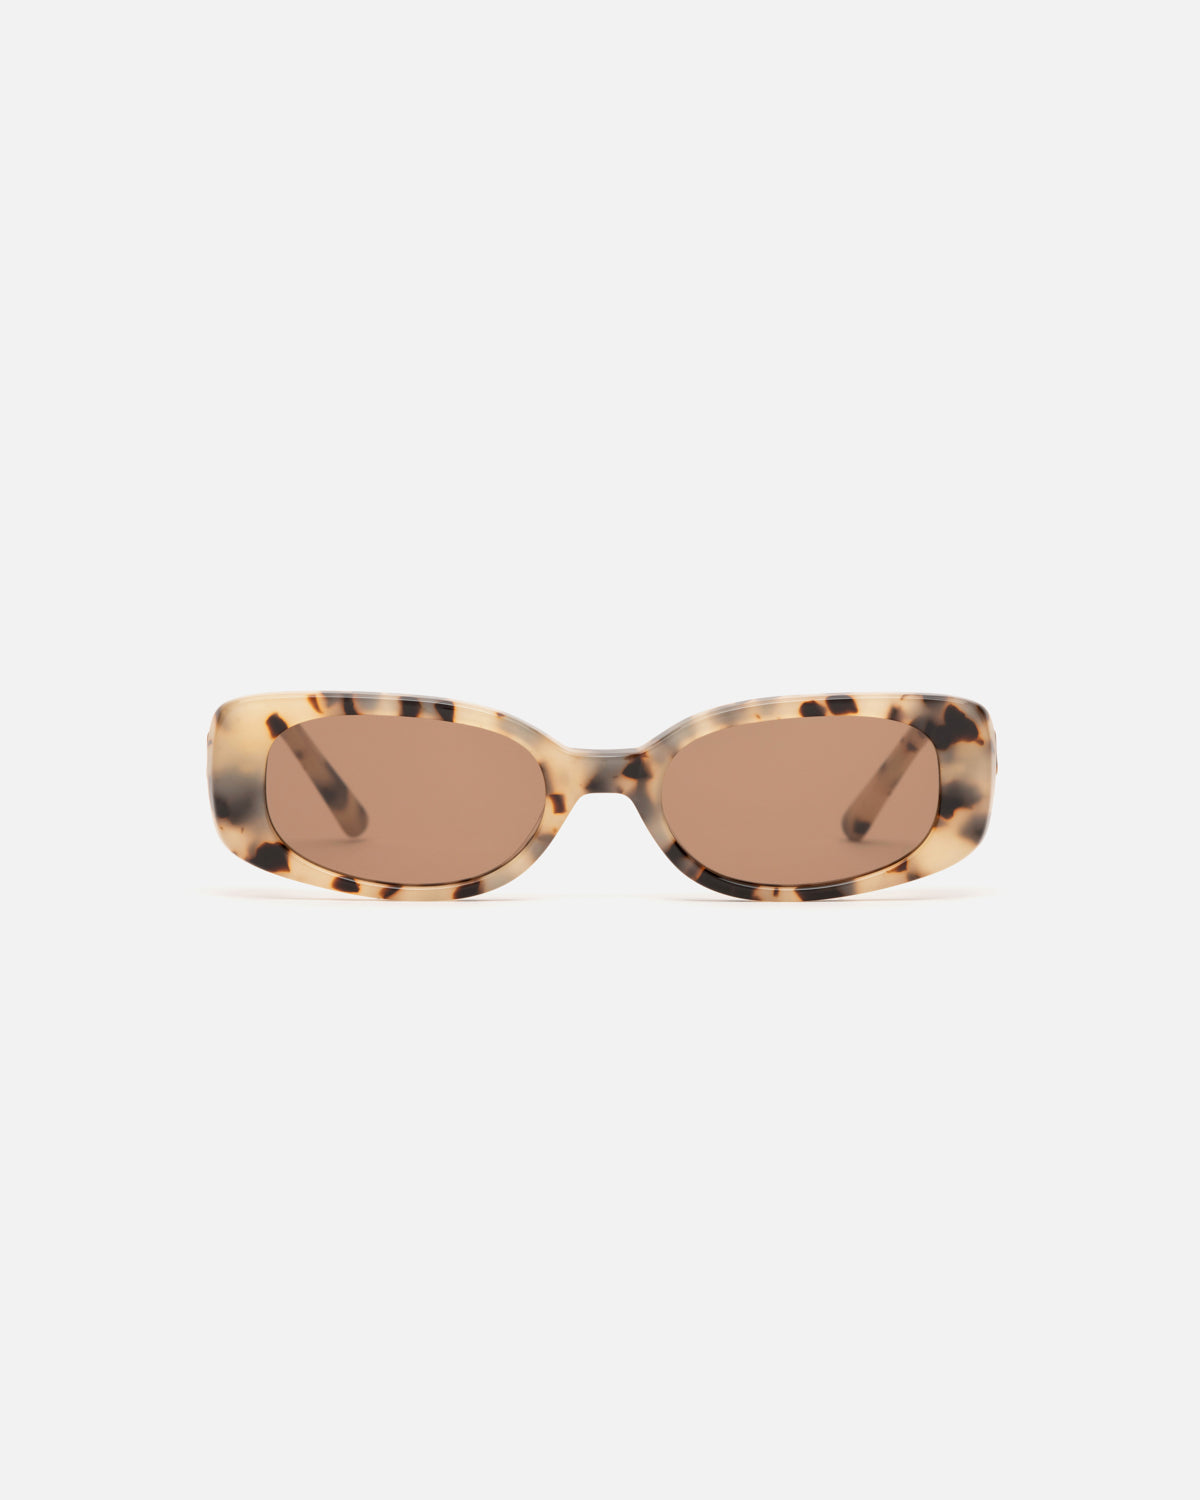 Lu Goldie Solene rectangle Sunglasses in tortoise shell acetate with brown lenses, front